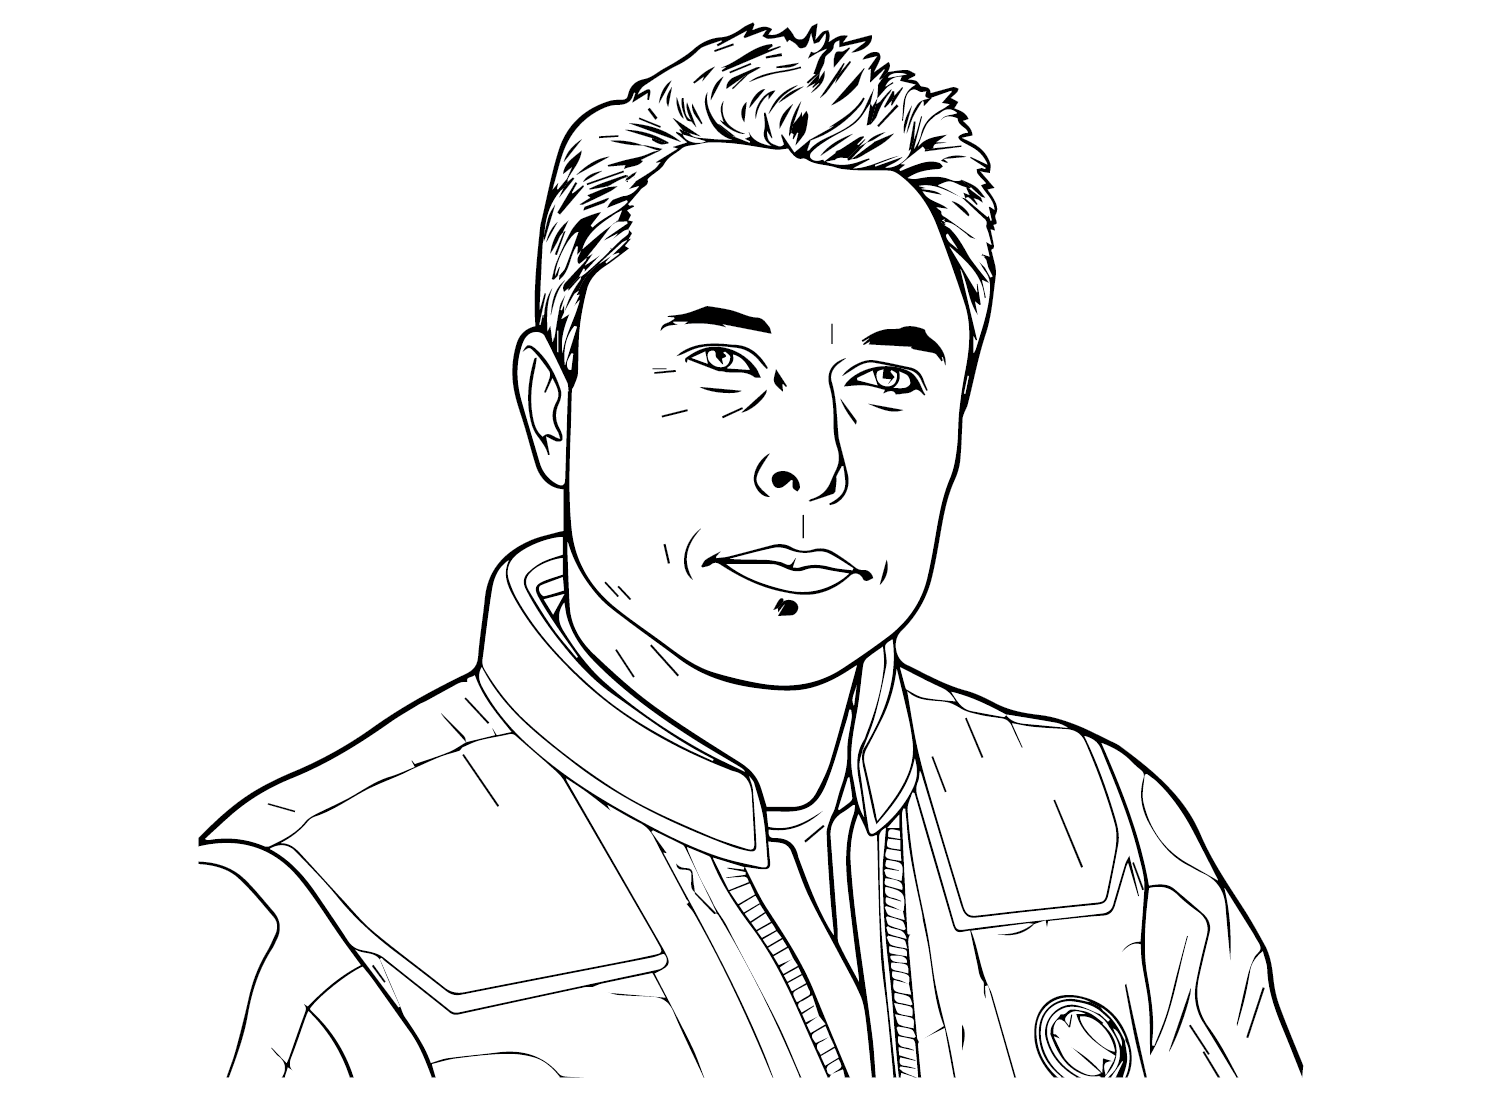 Elon Musk to Print Coloring Pages